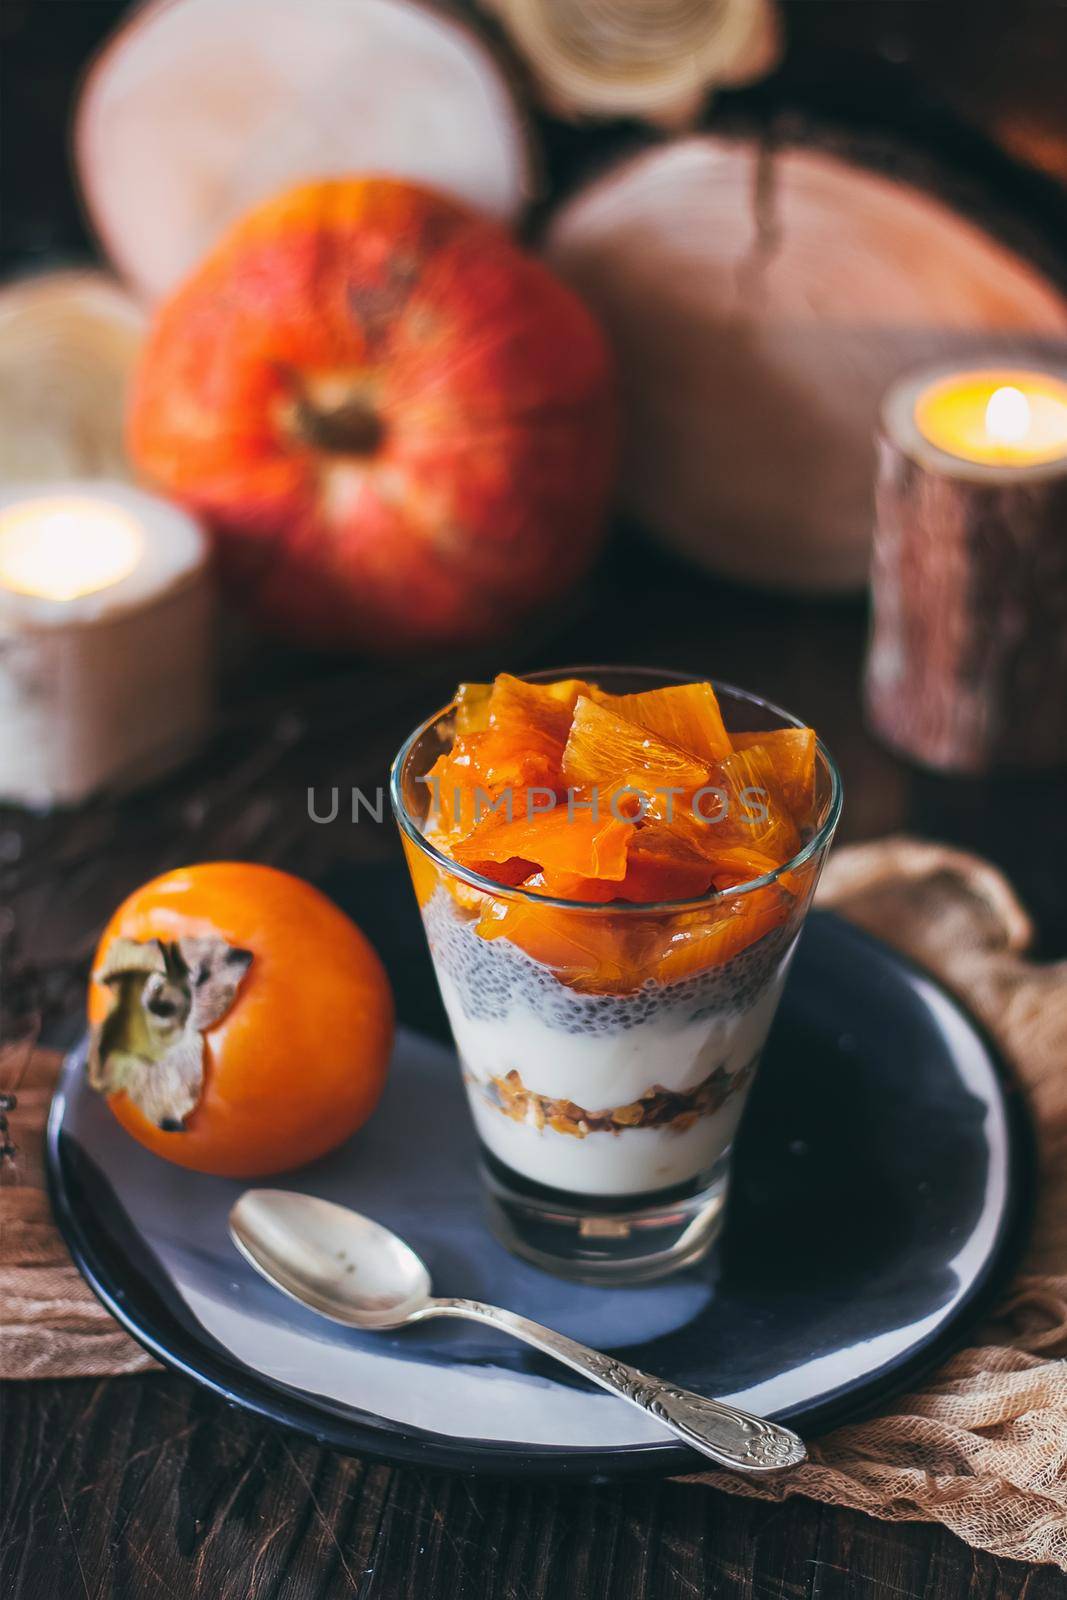 Delicious breakfast: chia seed pudding and persimmon close up in a glass on the table. horizontal by mmp1206